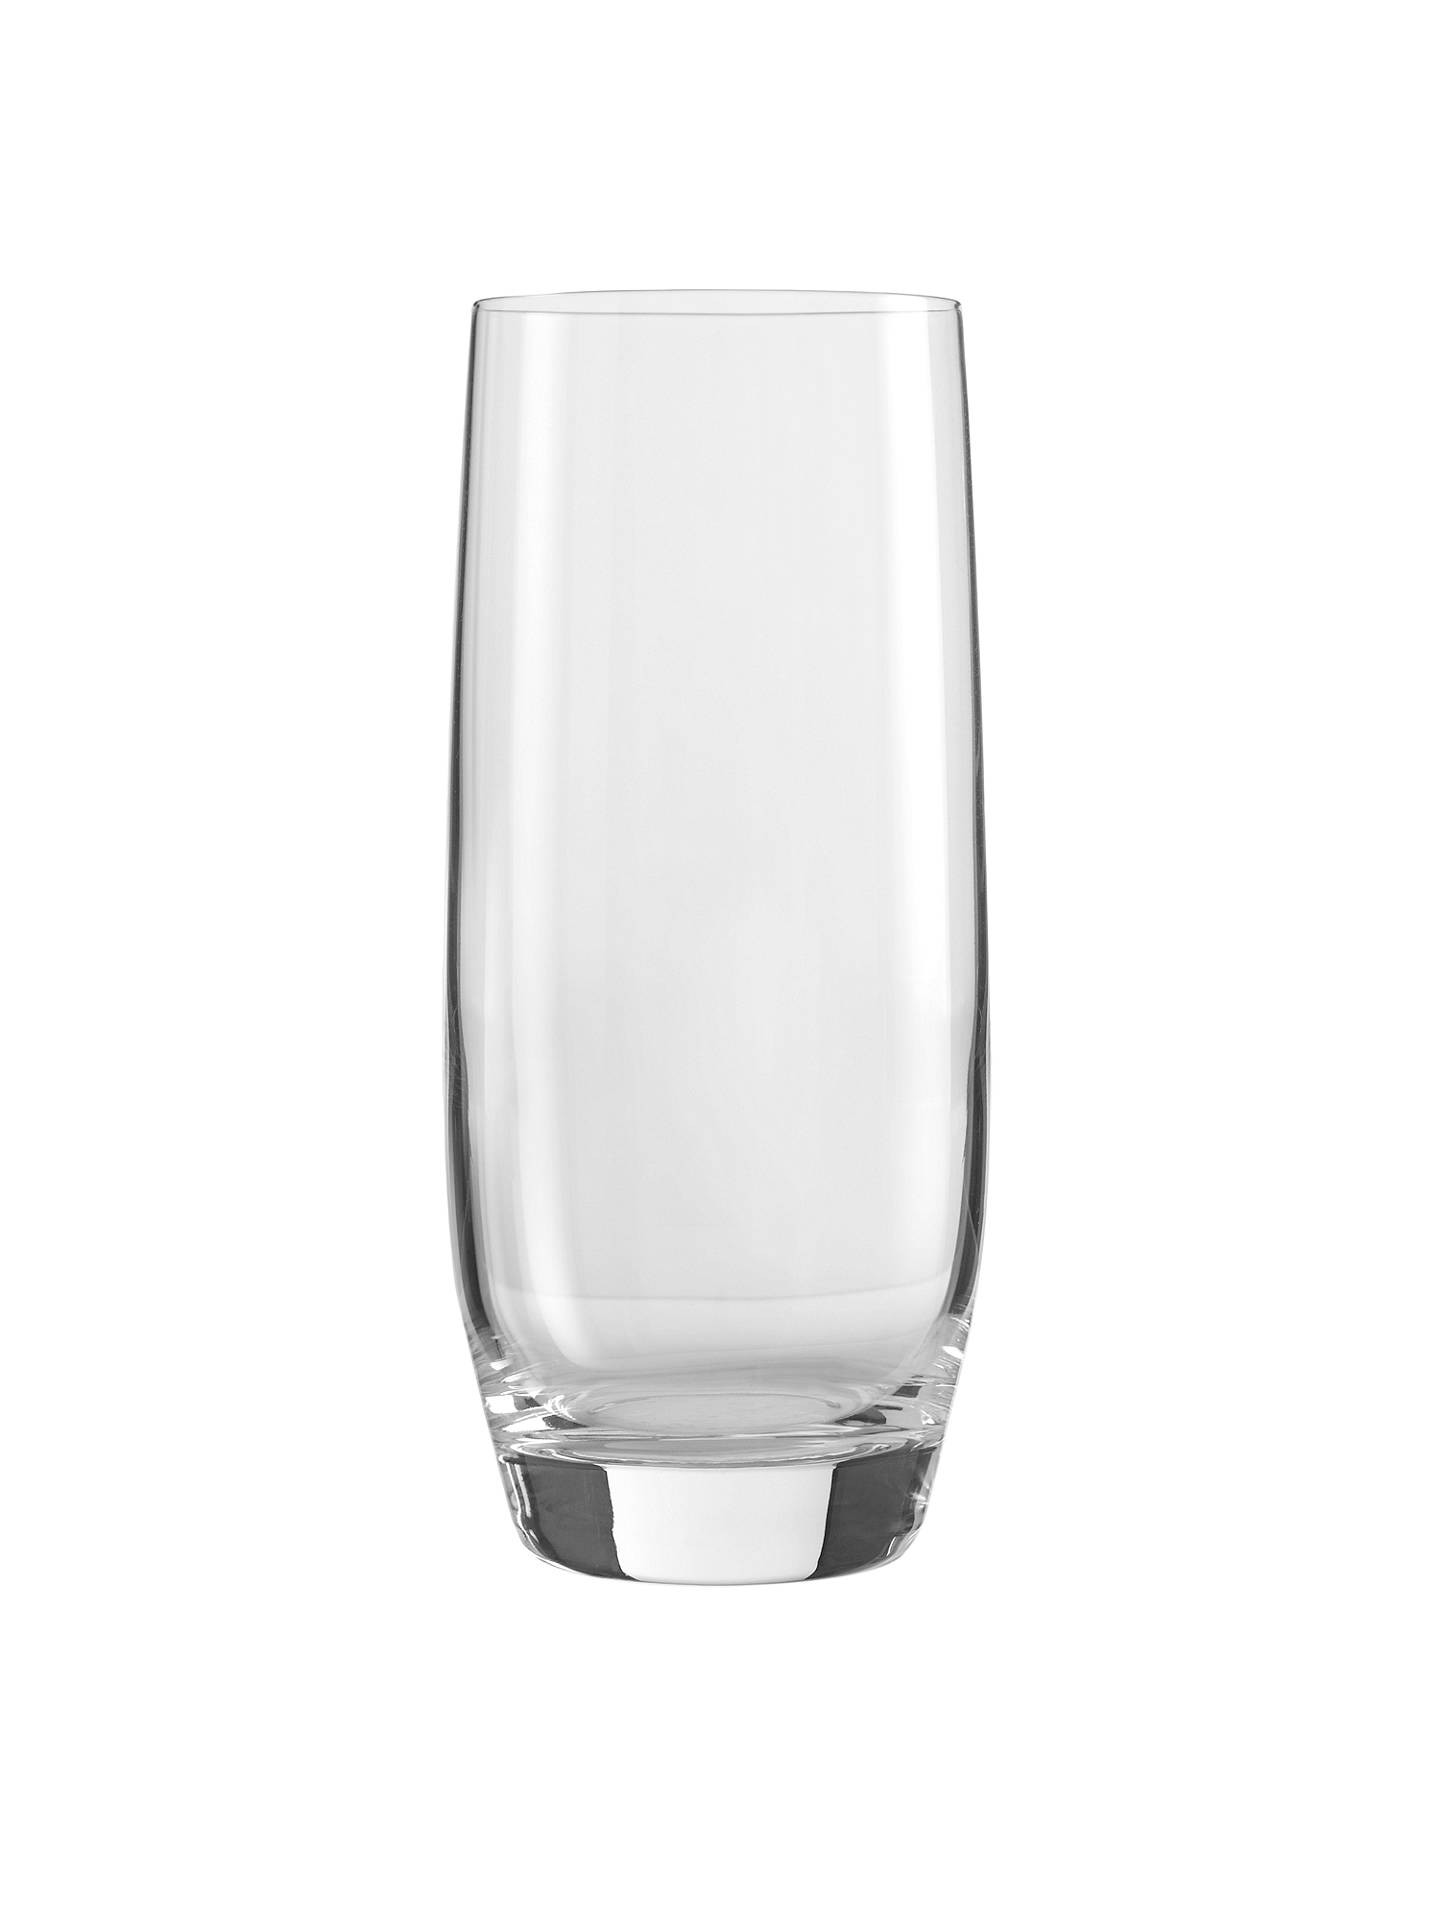 13 Stylish Ruby Cut Glass Vase 2024 free download ruby cut glass vase of john lewis partners connoisseur highballs set of 4 clear 450ml intended for buyjohn lewis partners connoisseur highballs set of 4 clear 450ml online at